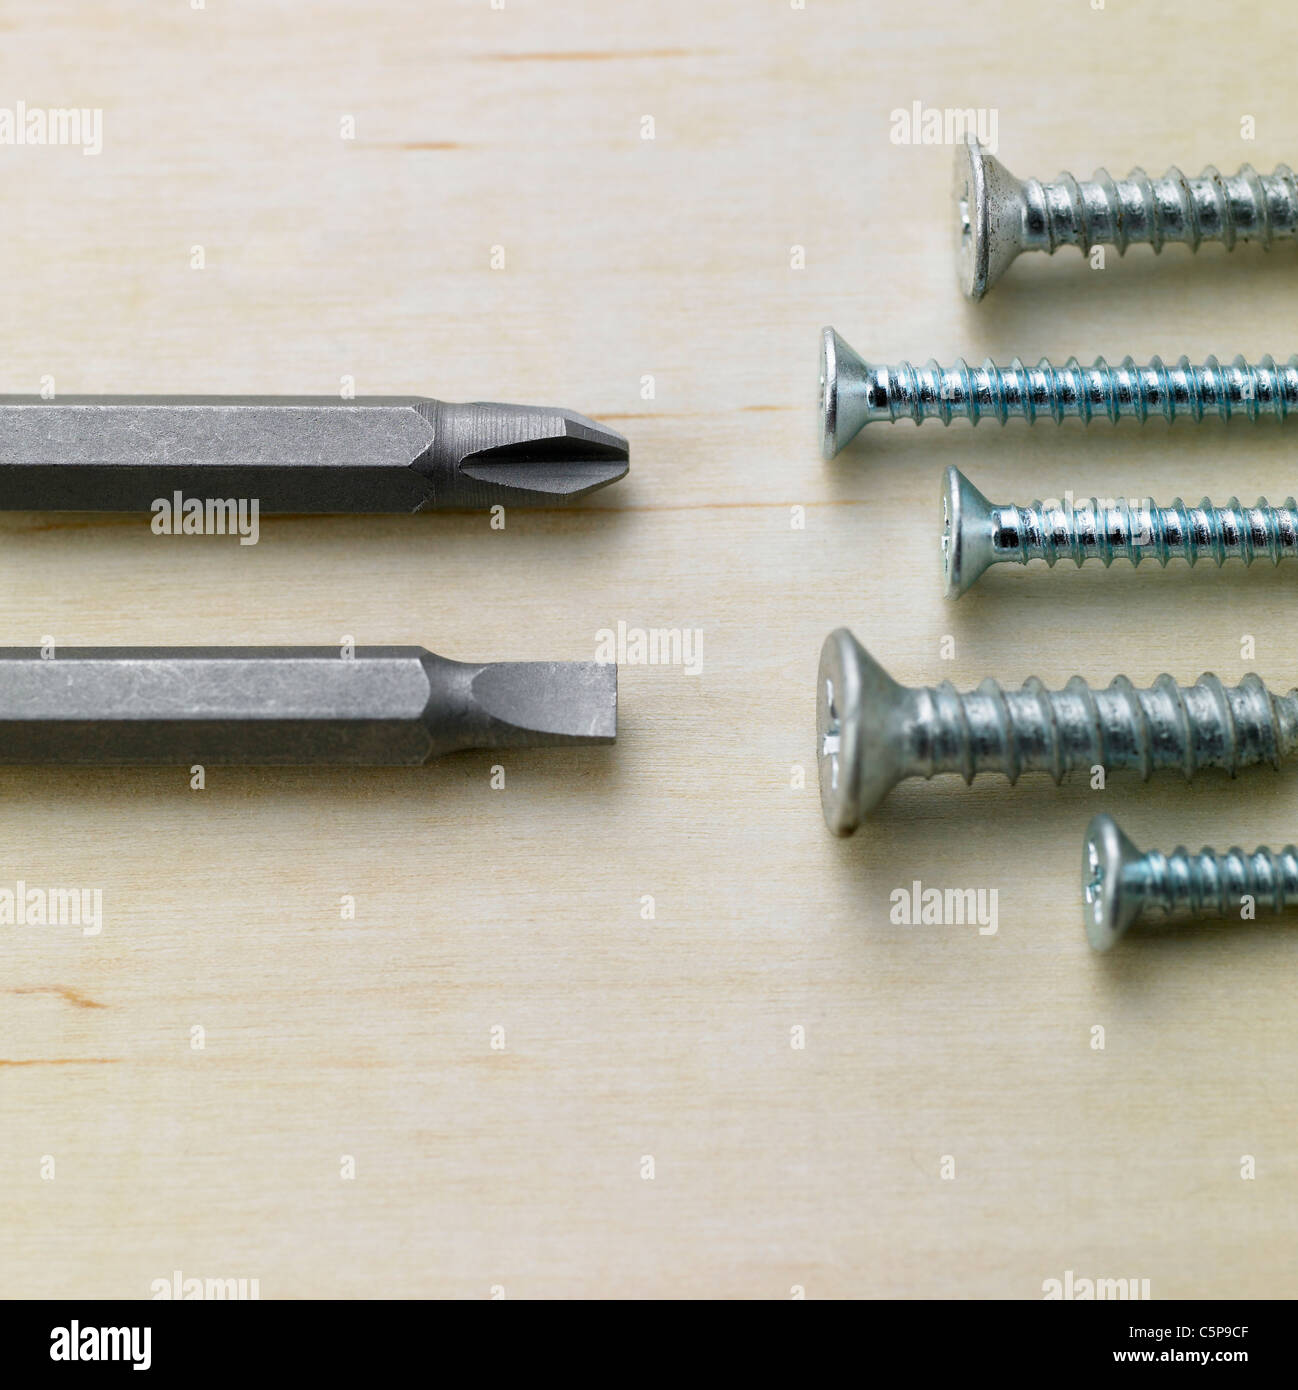 Screw drivers and screw nails Stock Photo